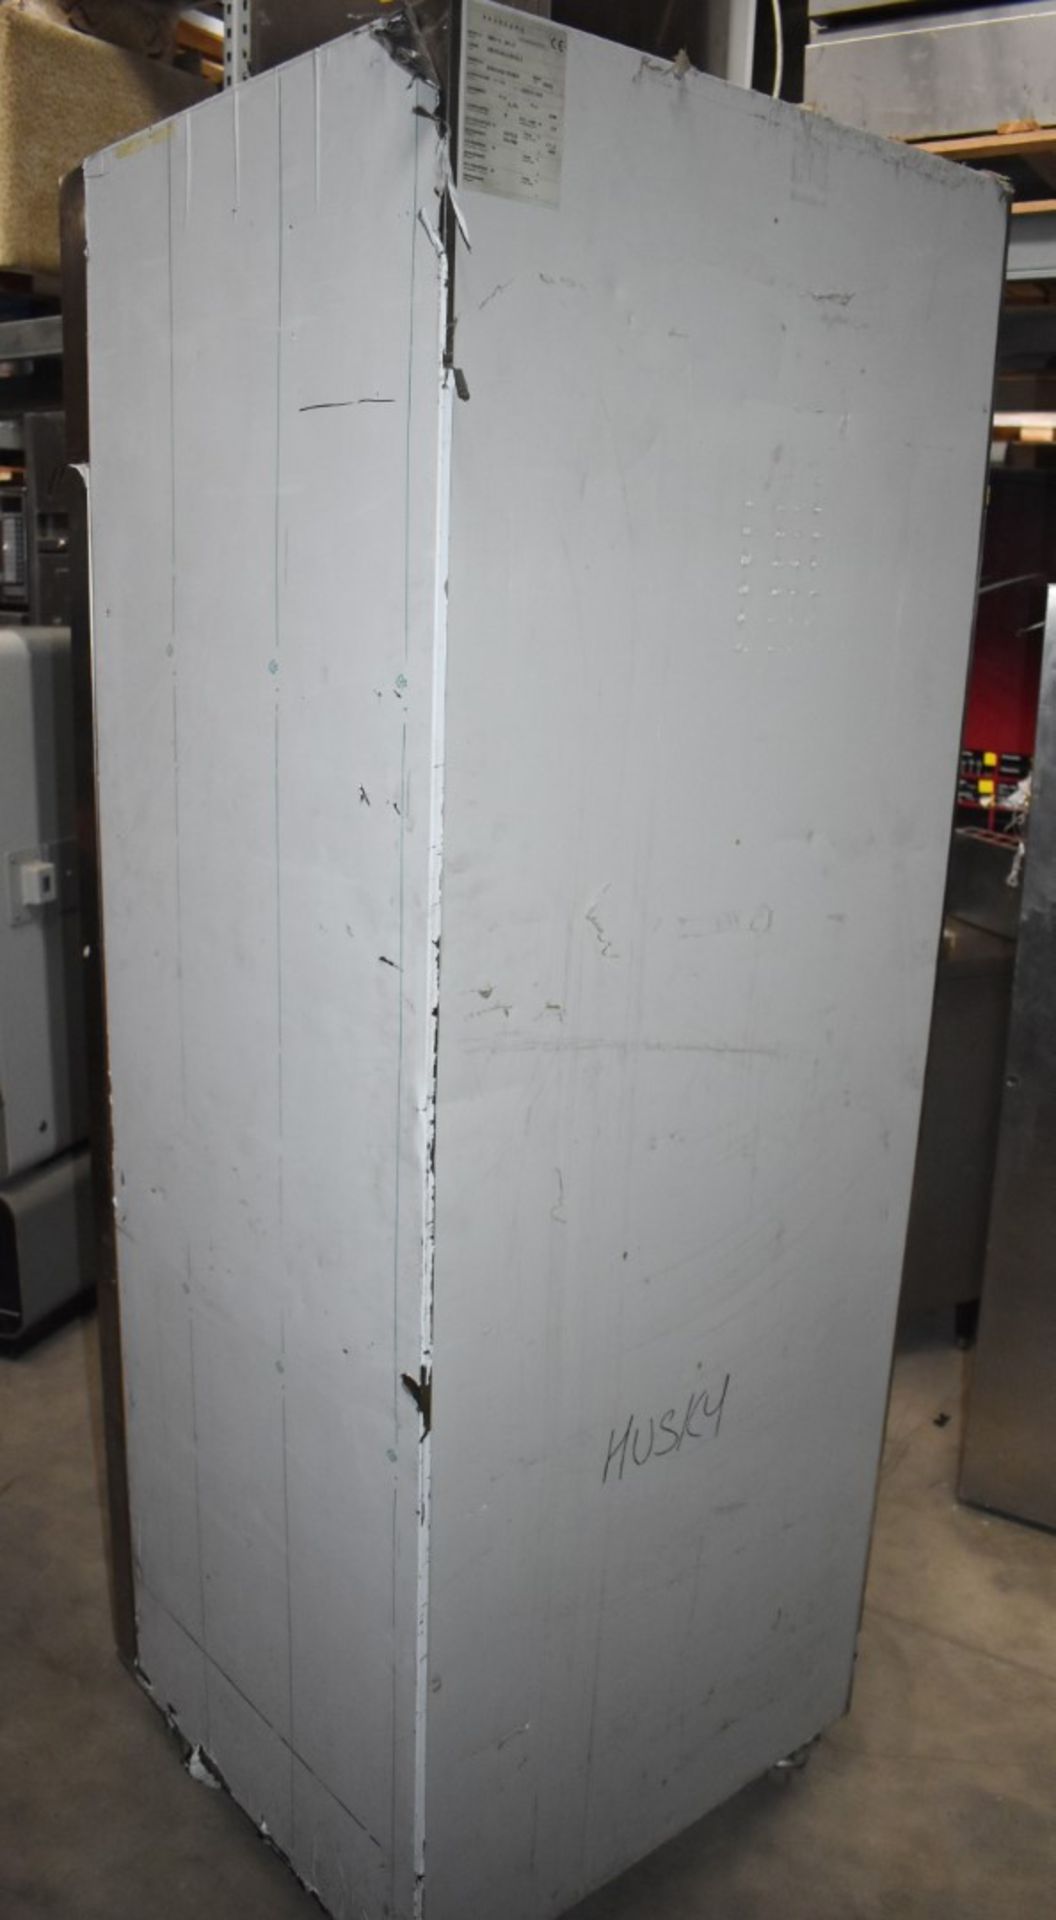 1 x Caravell by Friulinox AR6-2 Commercial Upright Refrigerator - Dimensions: H199 x W71 x D70 cms - - Image 4 of 9